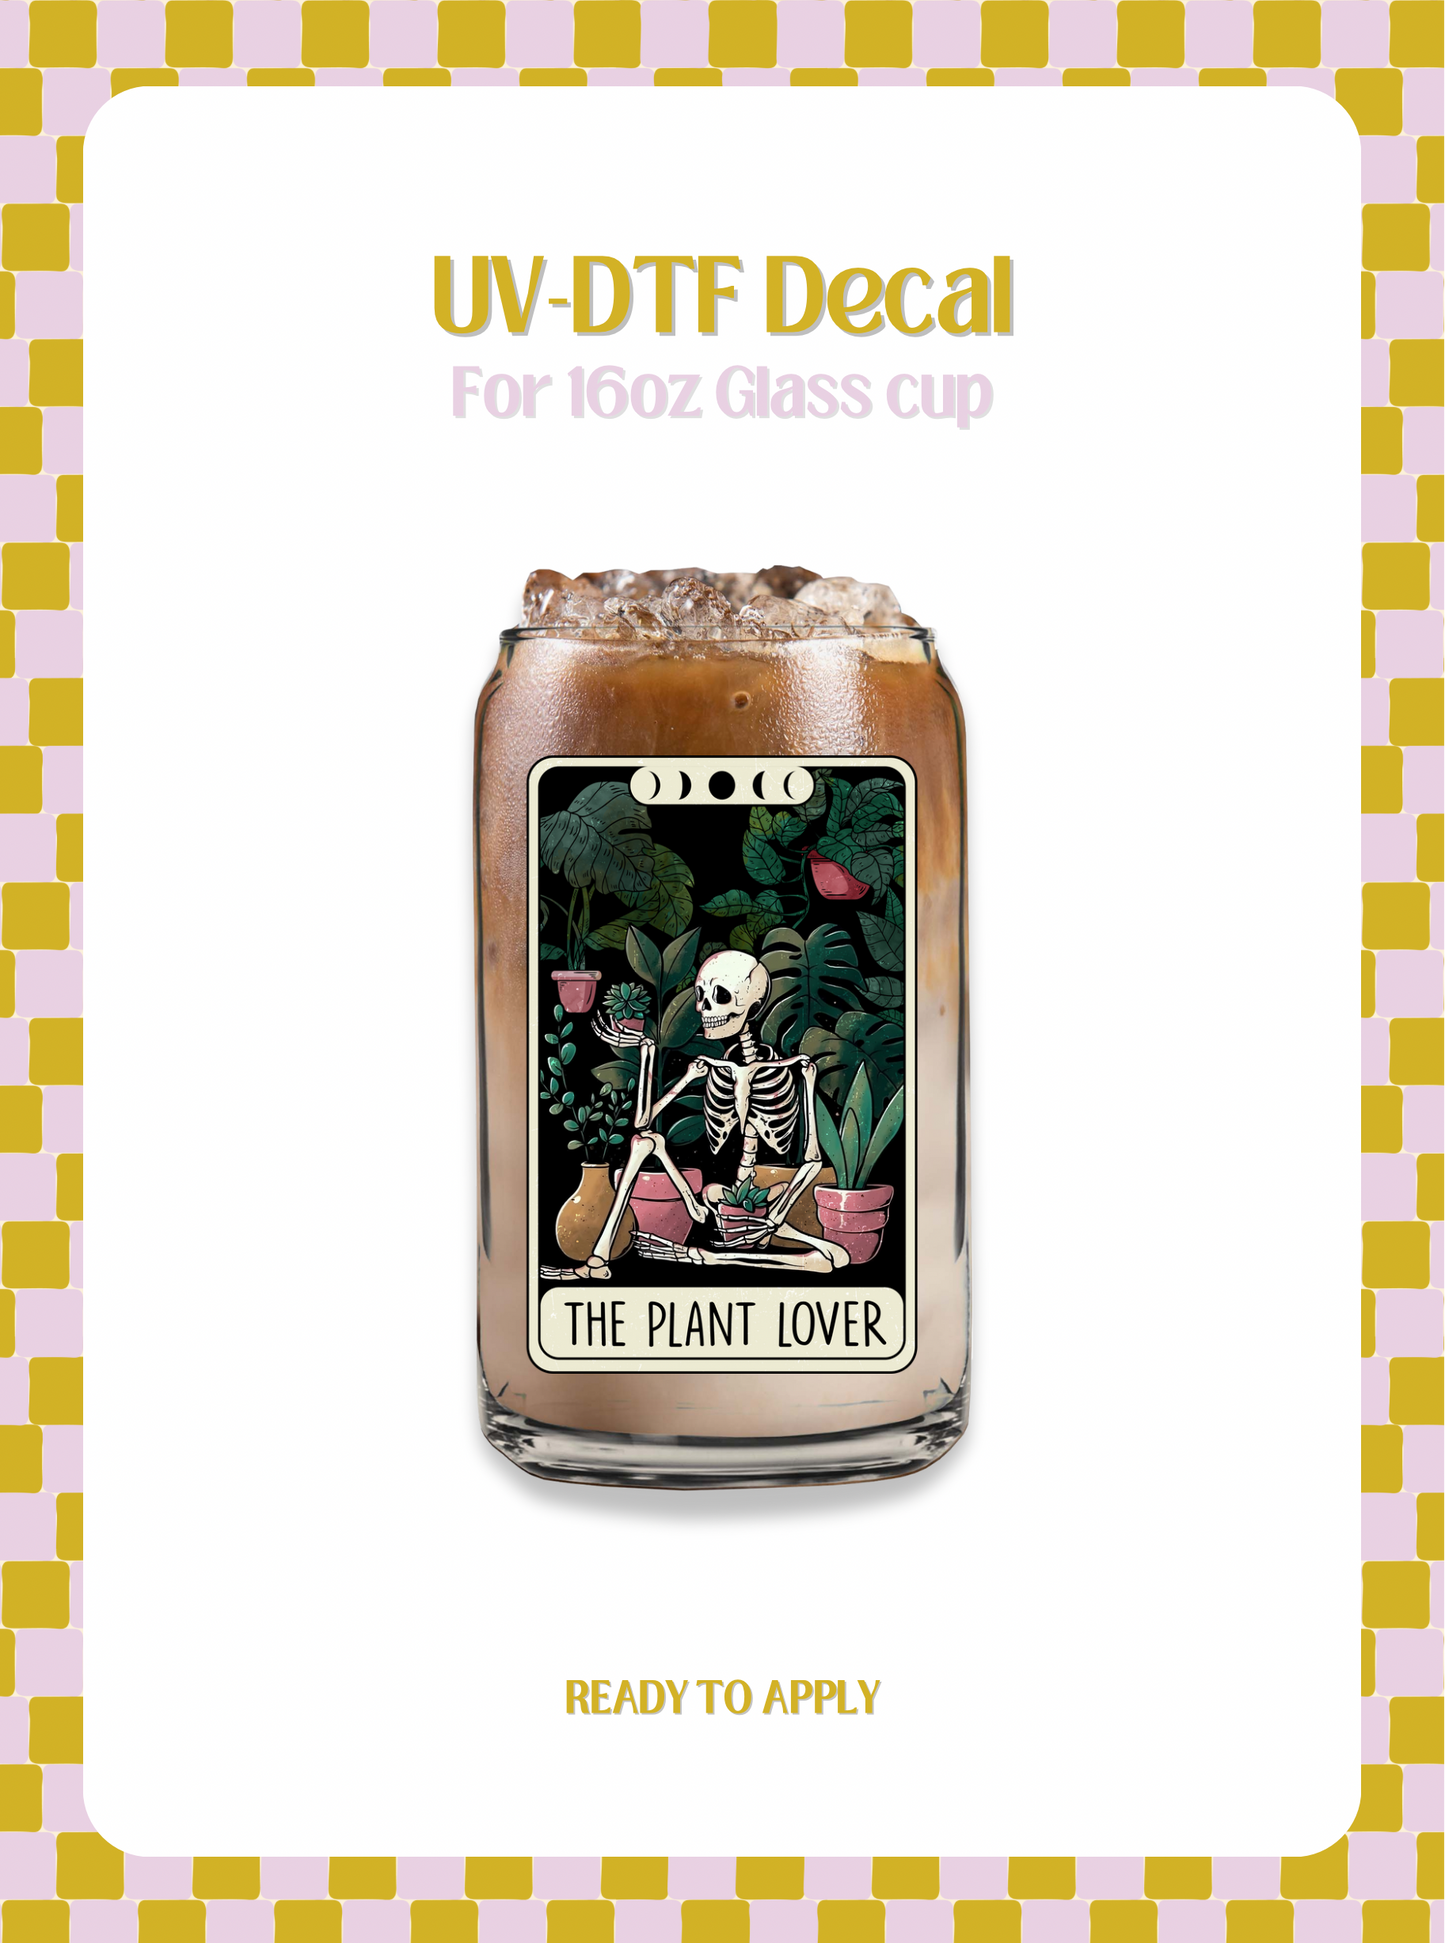 The Plant Lover UV-DTF Decal